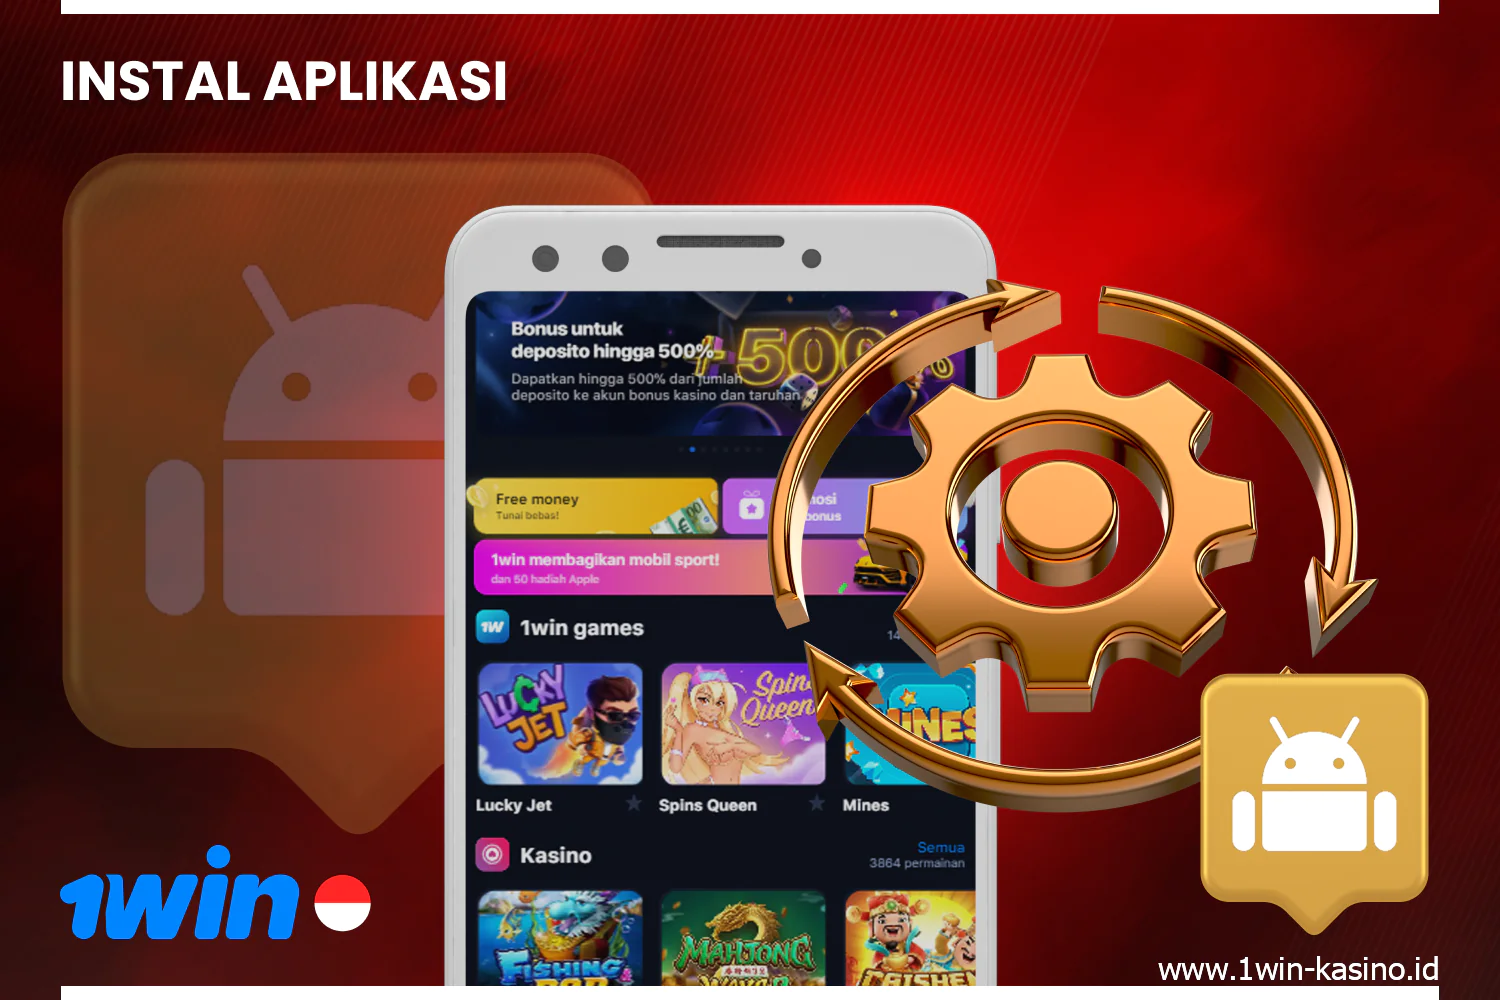 Wait for 1win apk to be fully installed on your phone